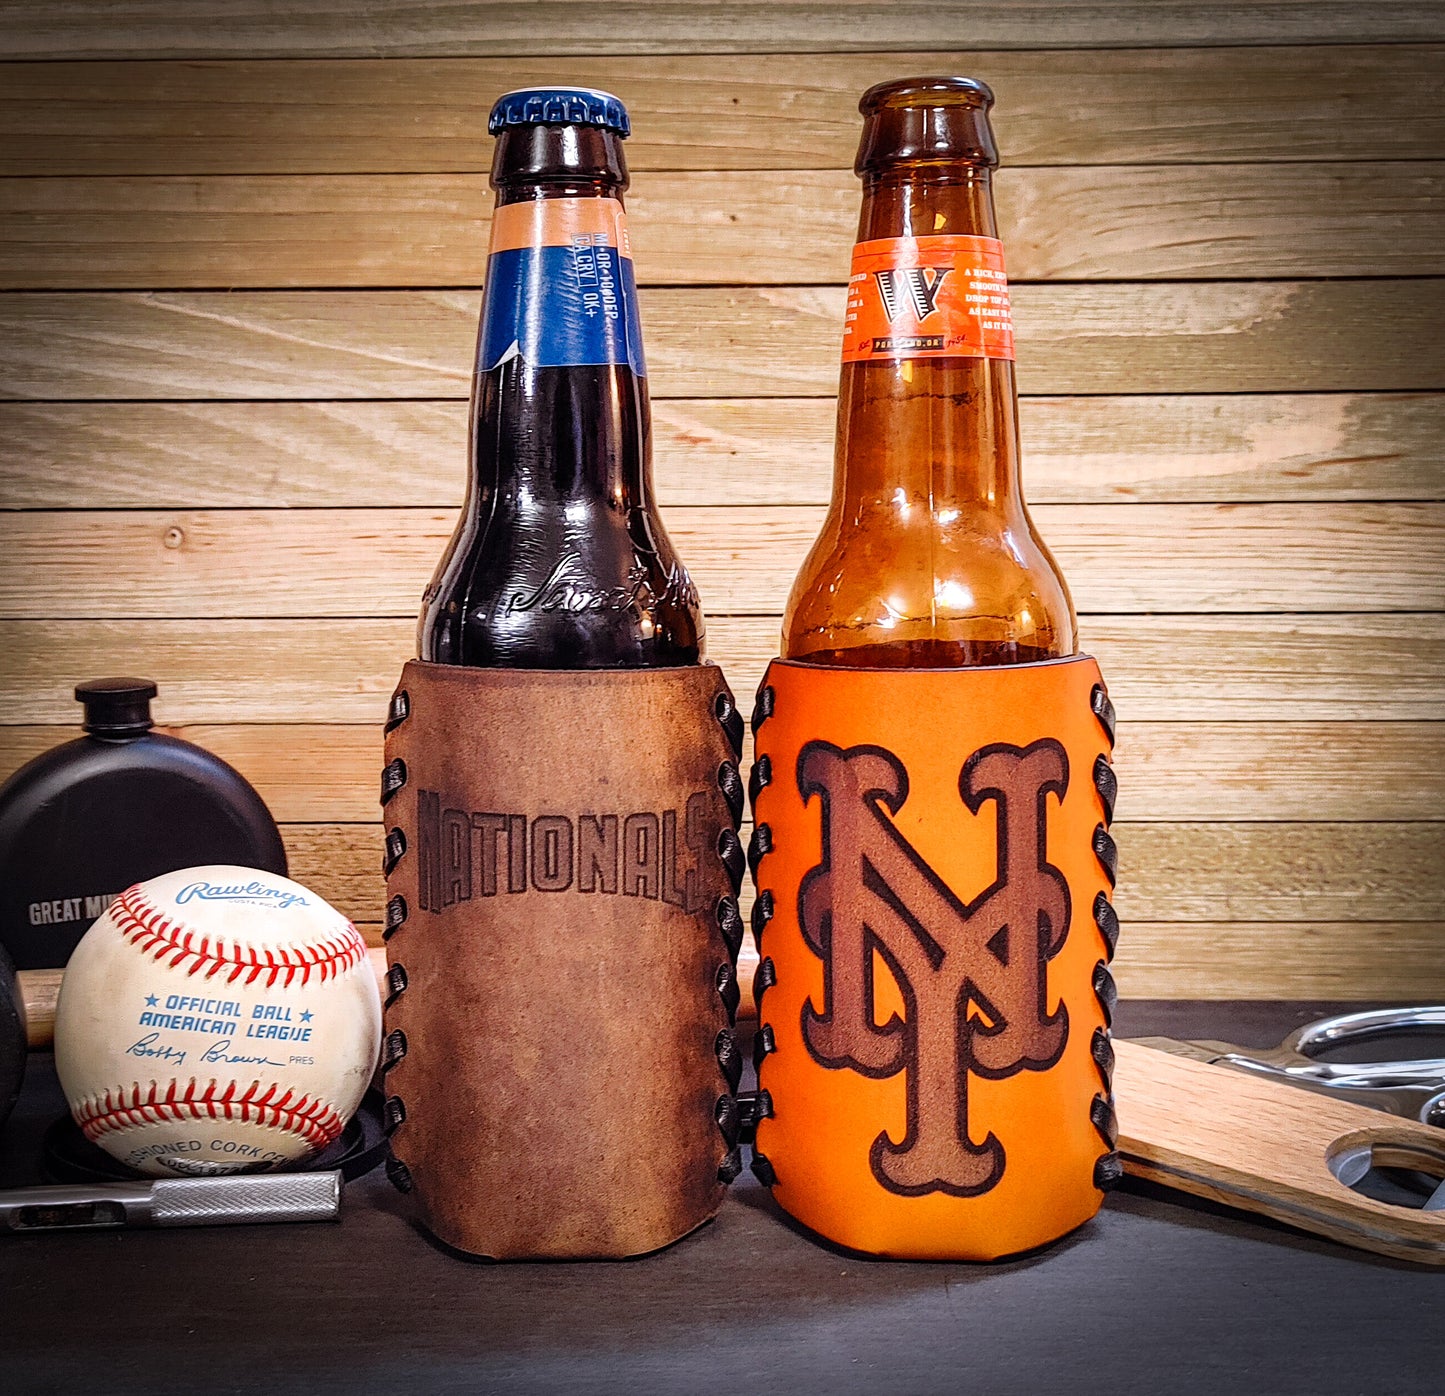 Custom Washington Nationals and New York Mets koozies in tan leather and brown leather wrapped around beer bottles gift ideas for baseball fans